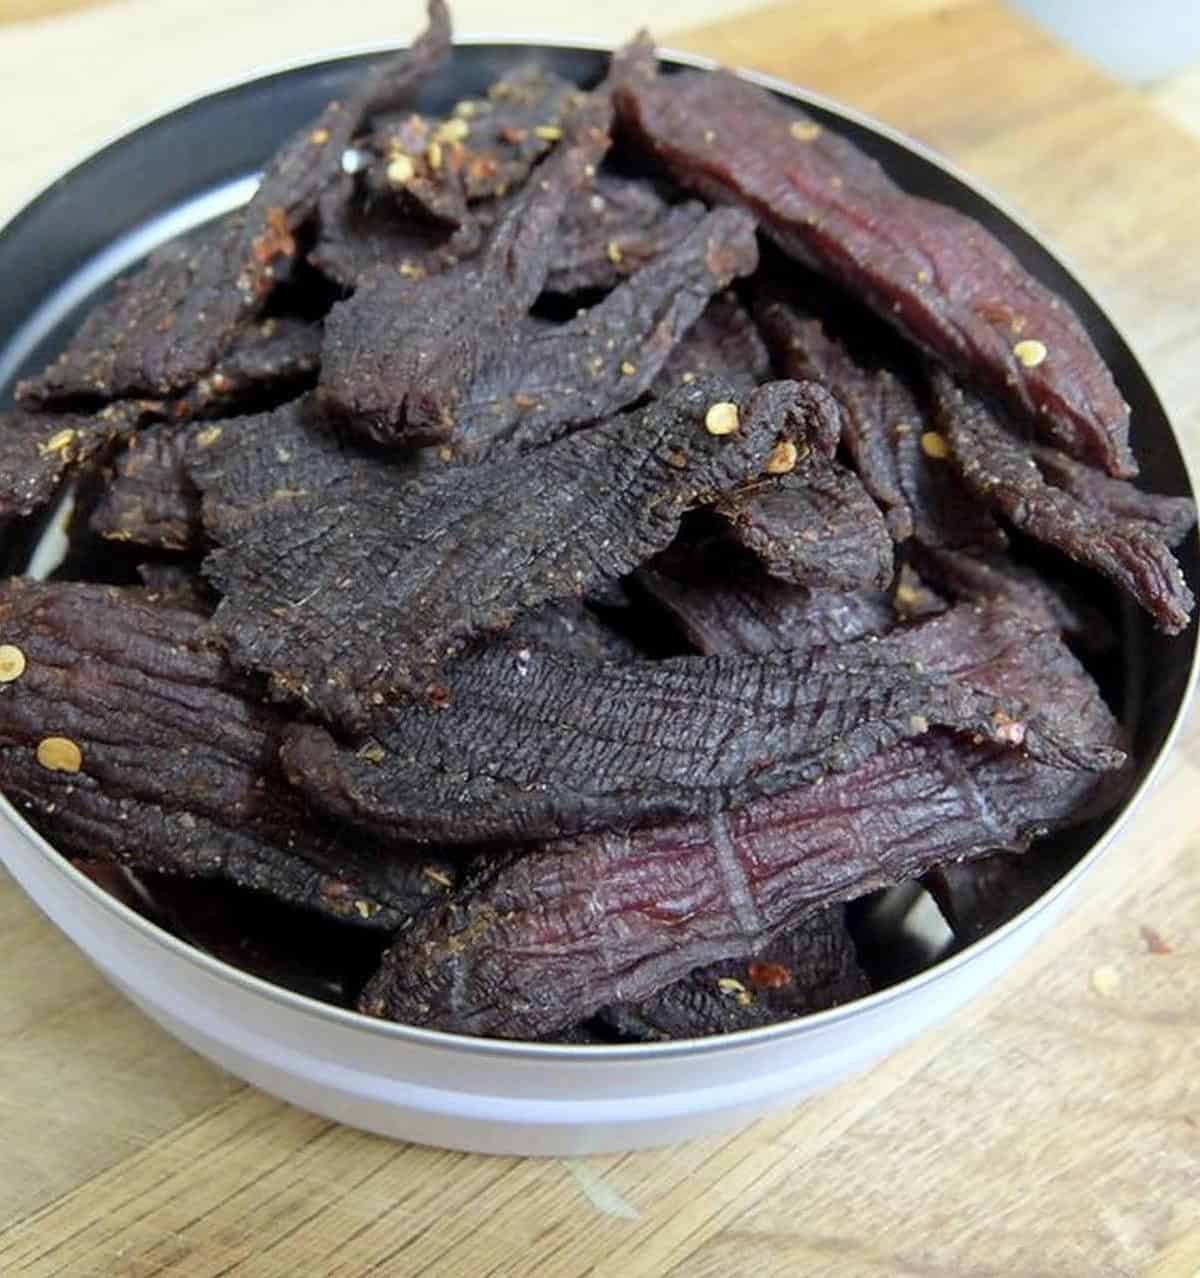  A dehydrator is the key to achieving crispy, flavorful beef jerky.